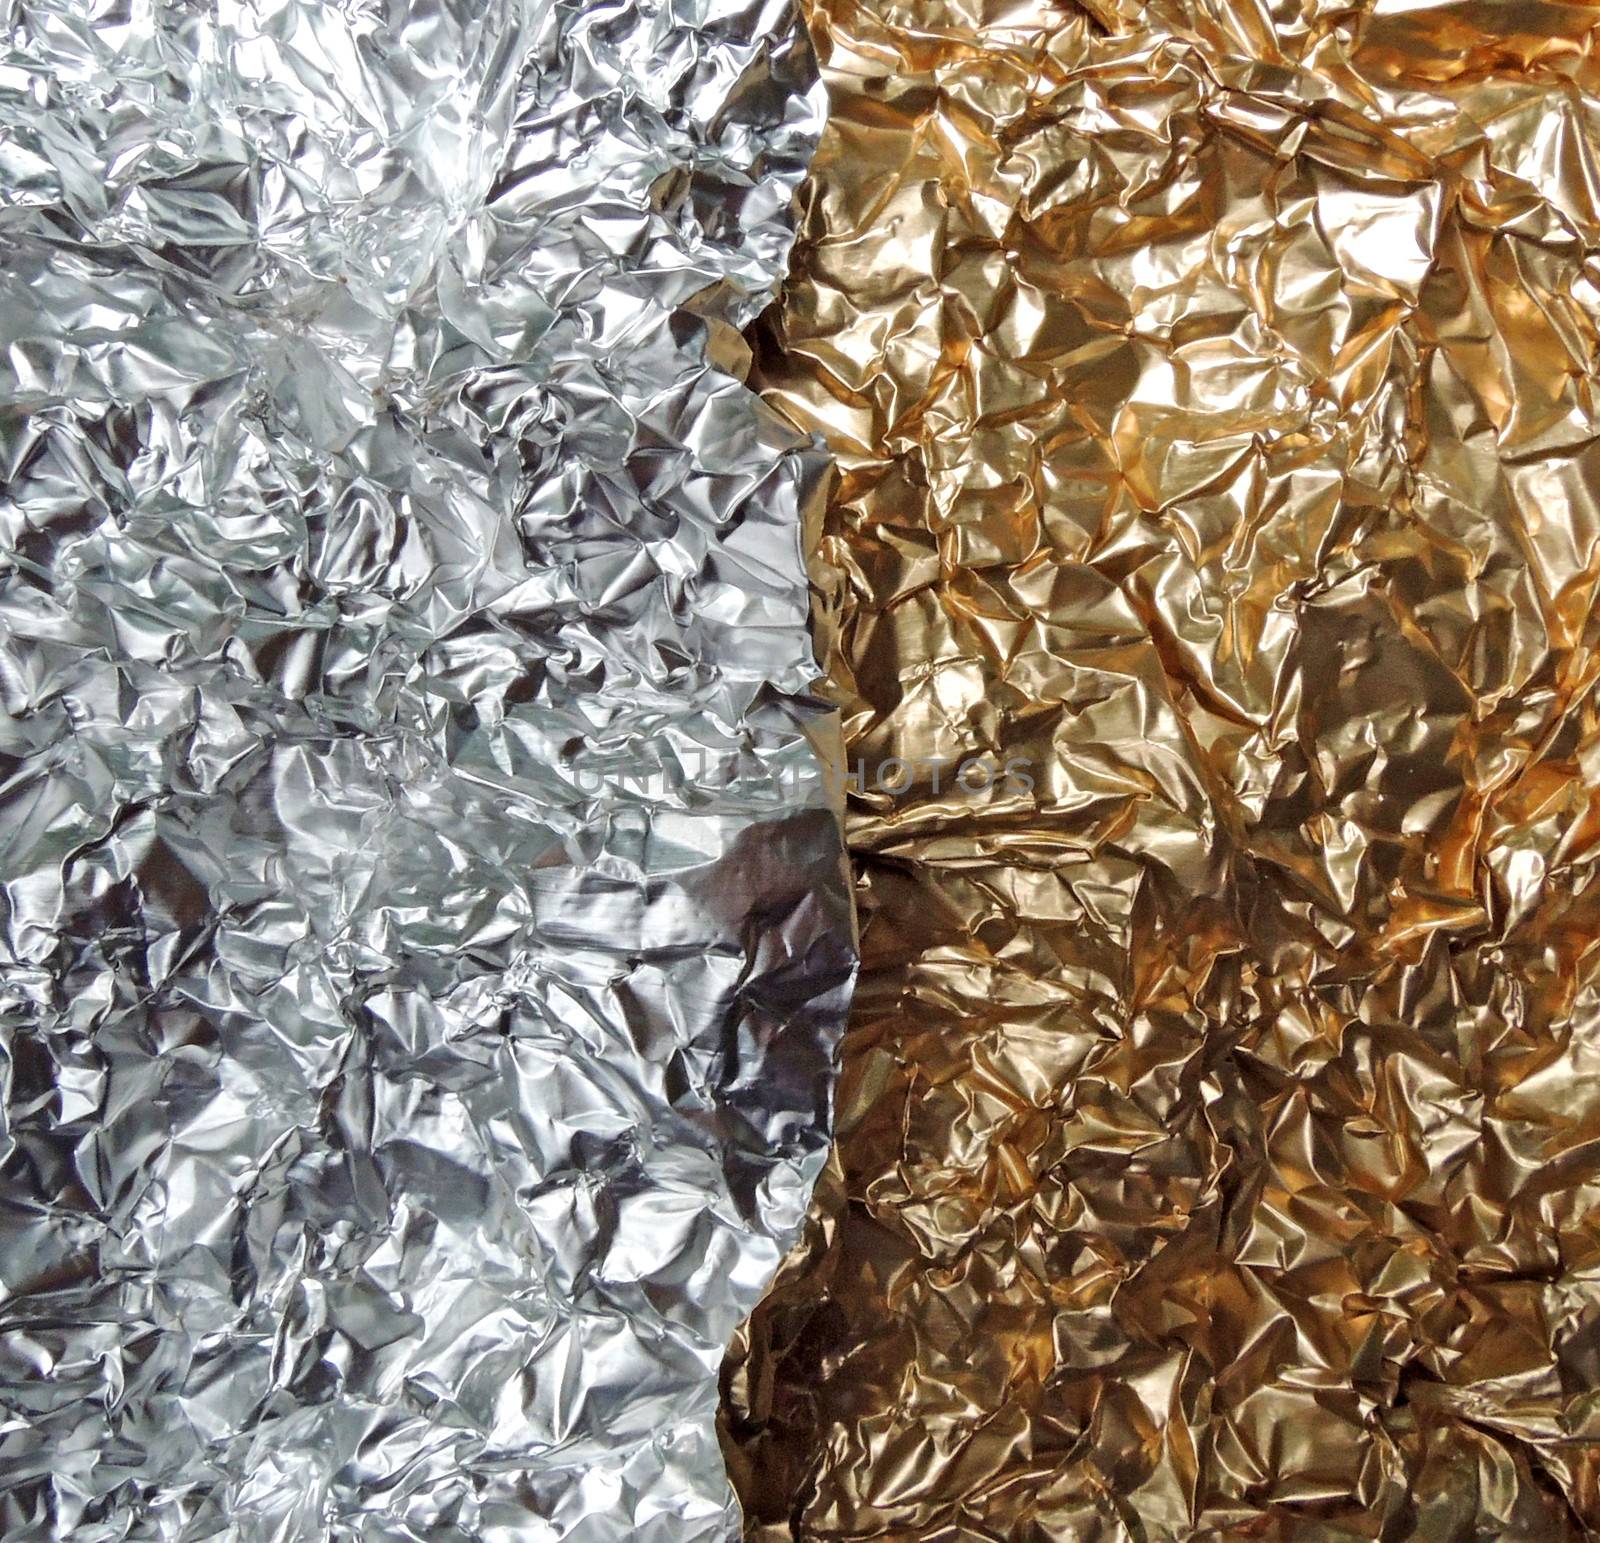 Collage of silver and gold aluminium foil by MalyDesigner